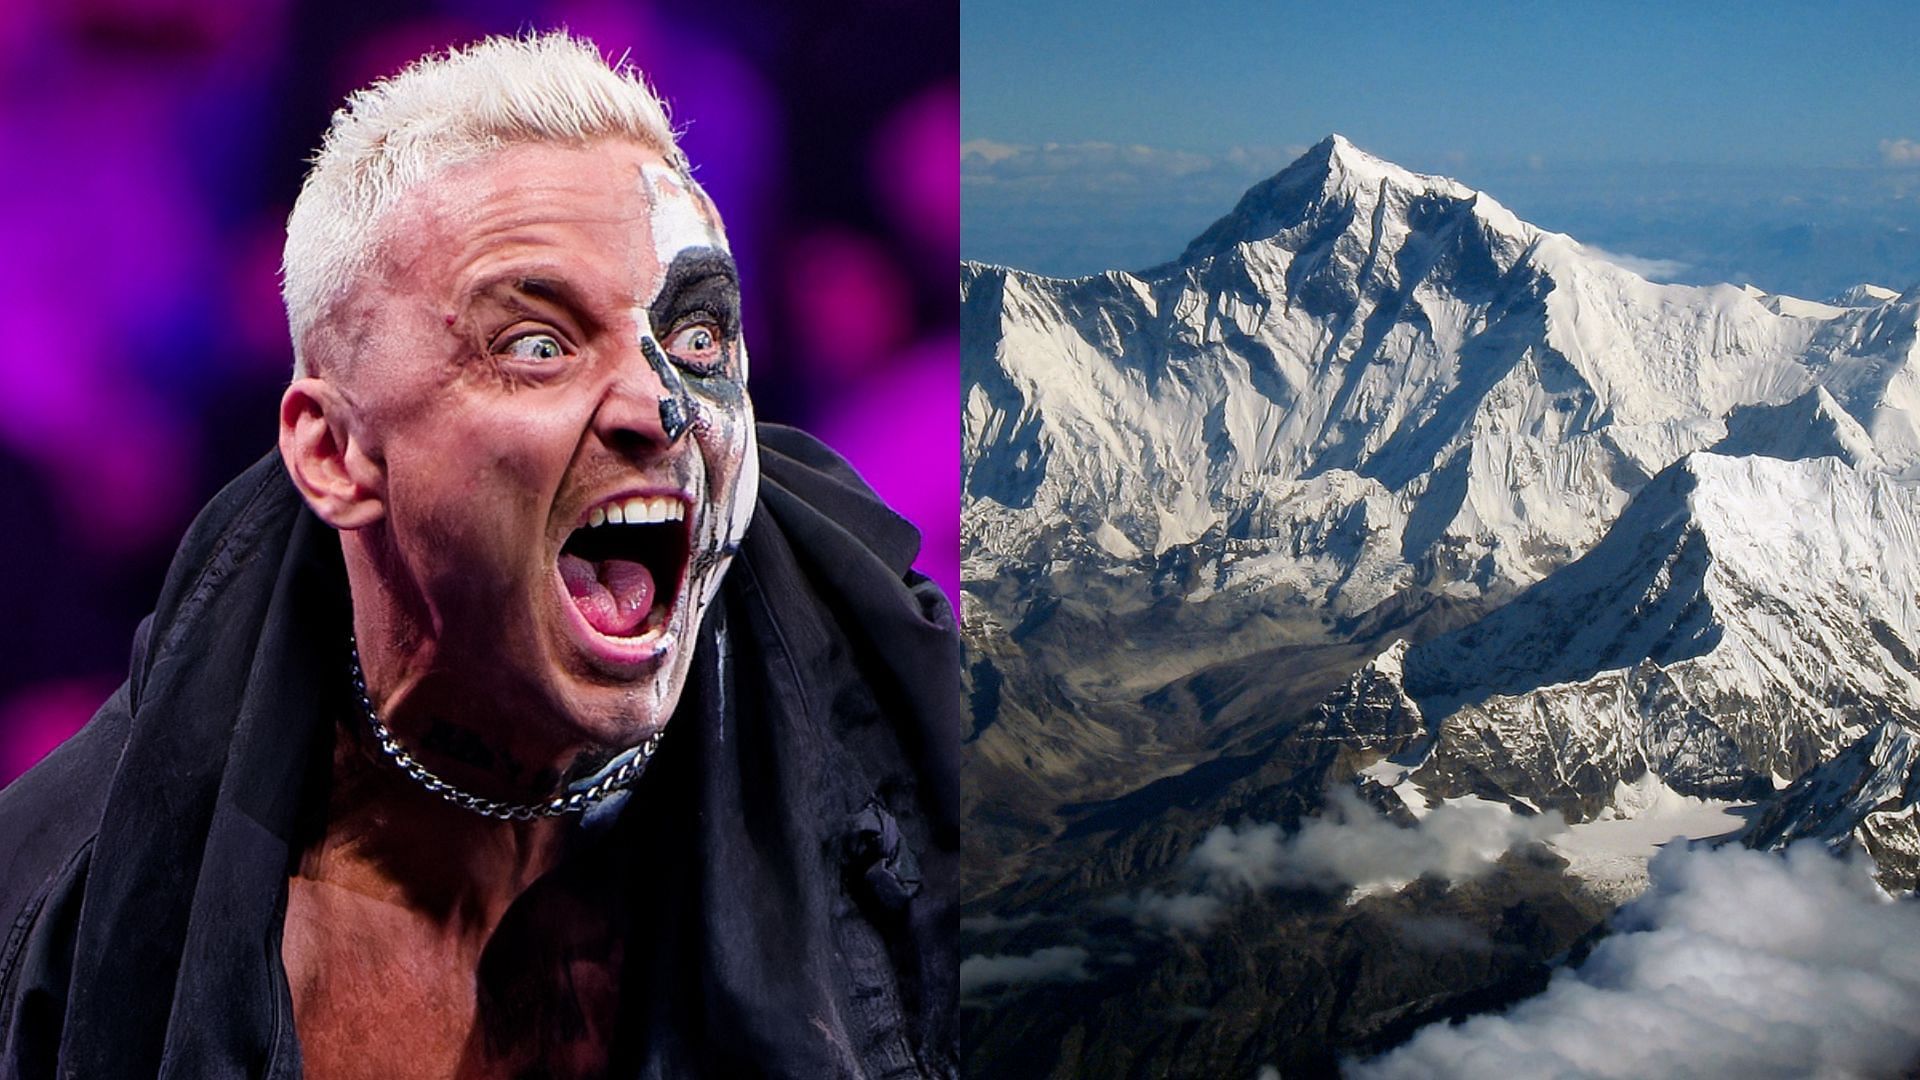 Darby Allin has revealed when he will climb Mount Everest